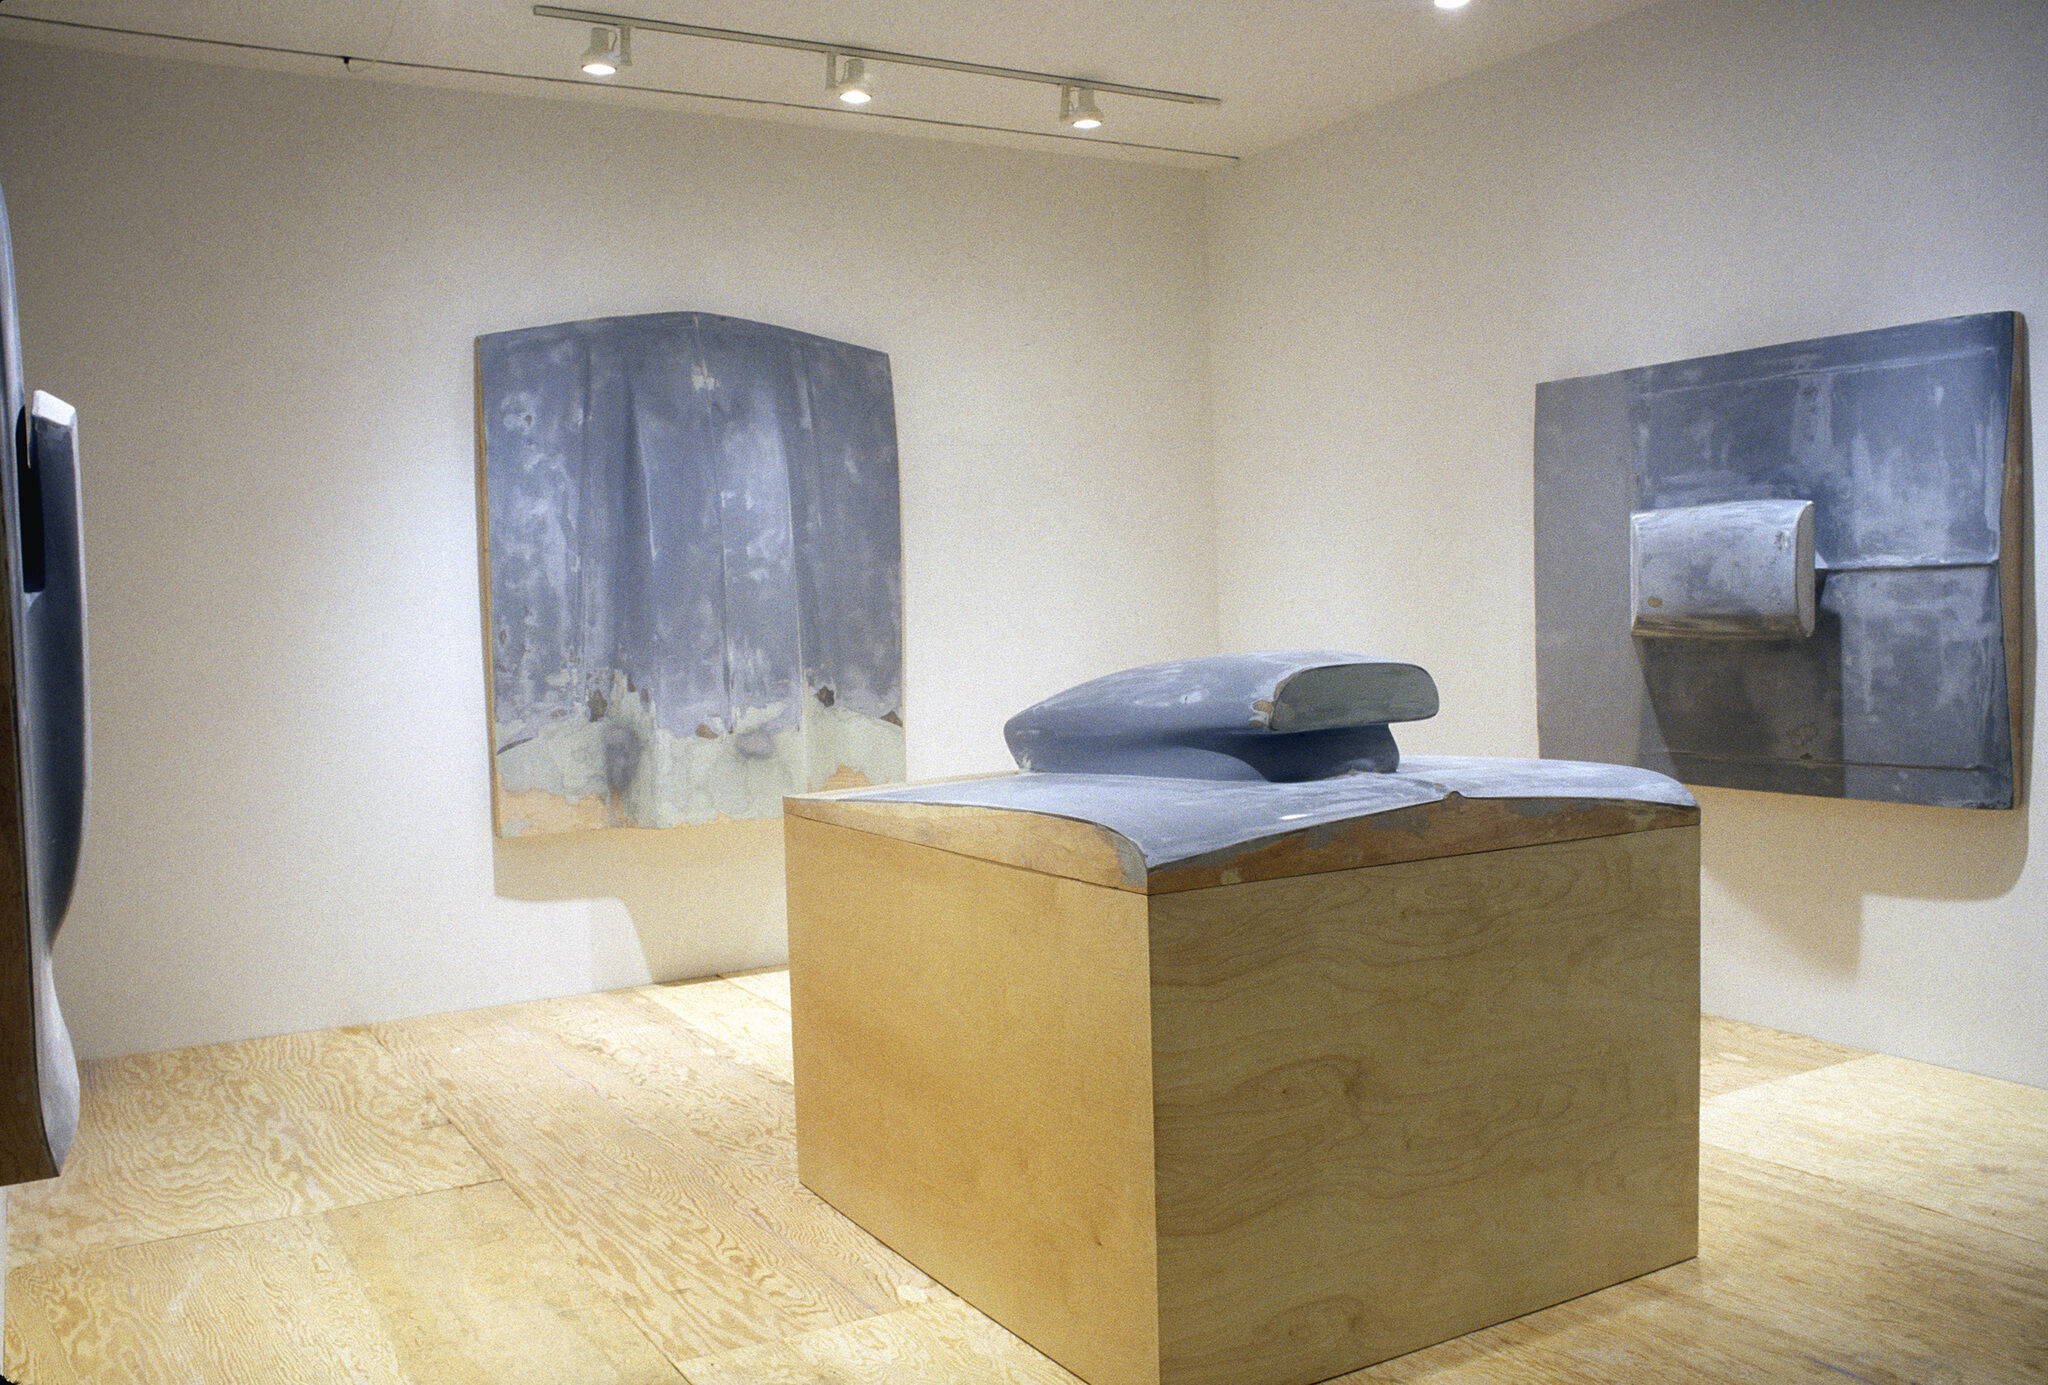 A gallery with blue sculptures on the walls and on the floor.